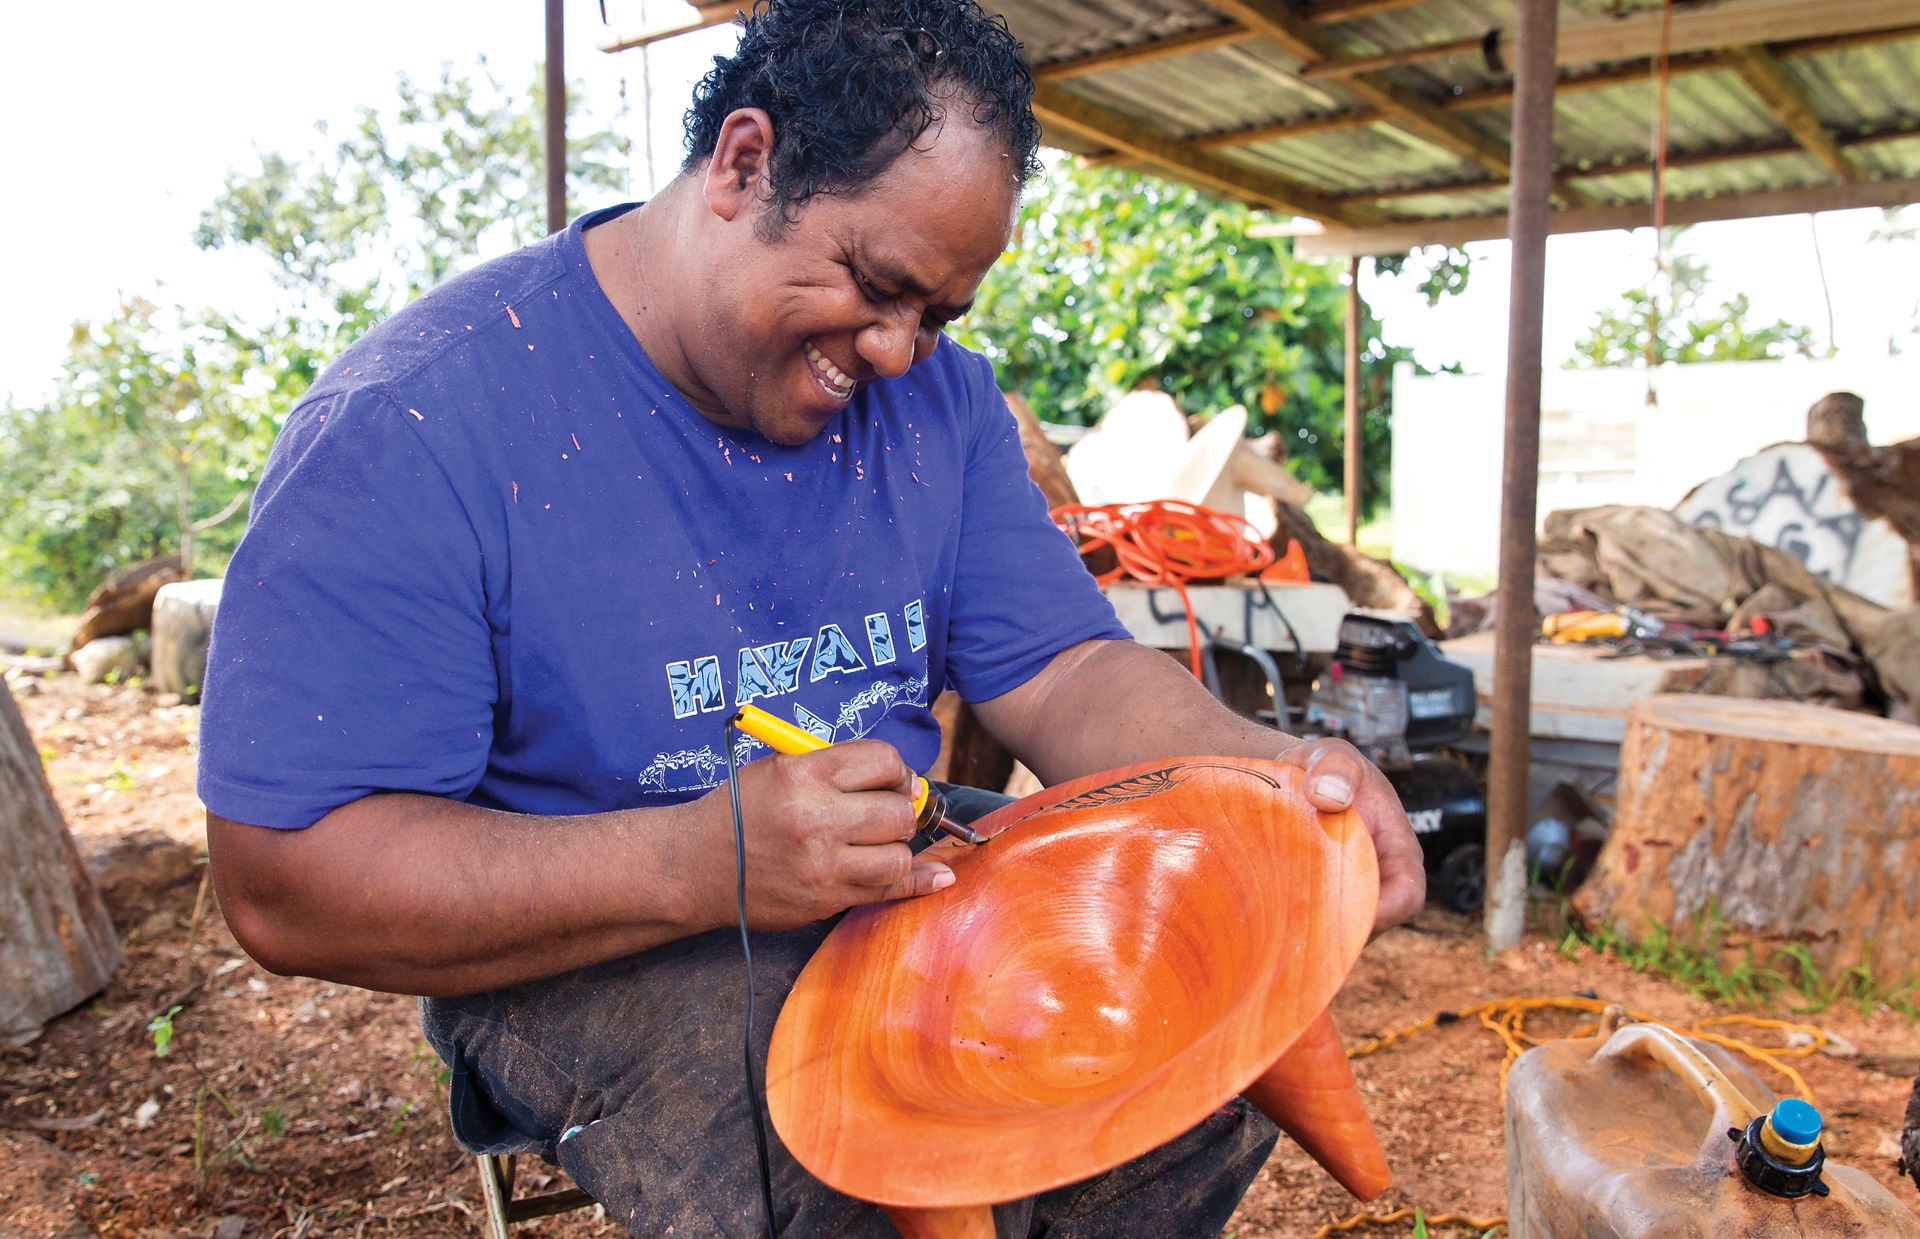 Feinga Fanguna considers his woodcarving ability to be a gift, but one that has required time and effort to cultivate. “It is a blessing given to me from our Father in Heaven,” he says. He is grateful his talent can provide needed income for his family.